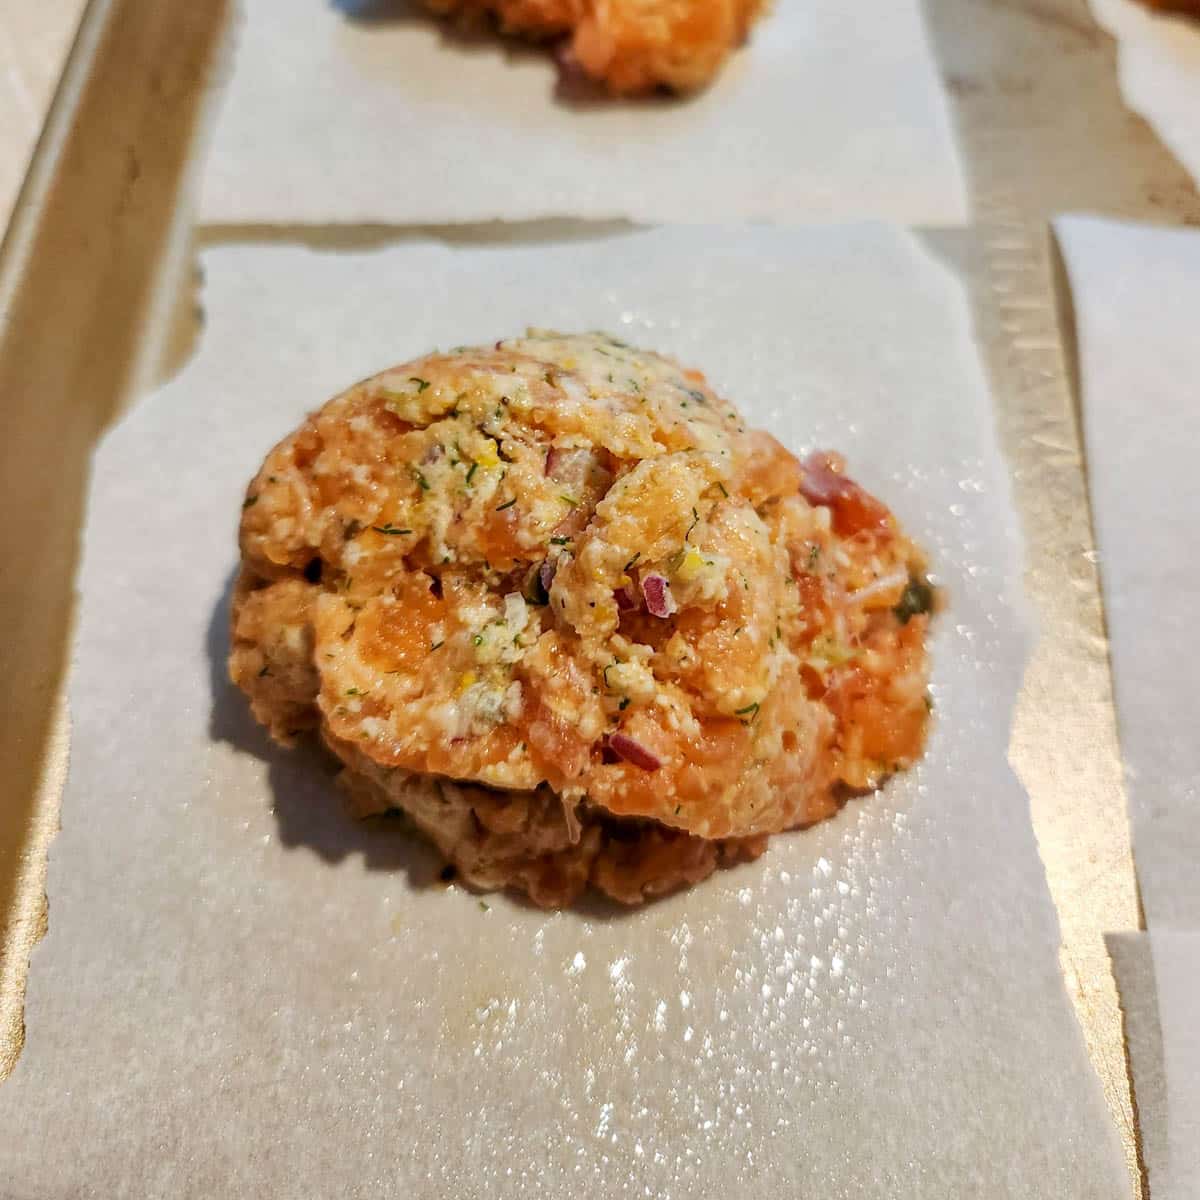 ½ cup portion of salmon patty mixture on wax paper 